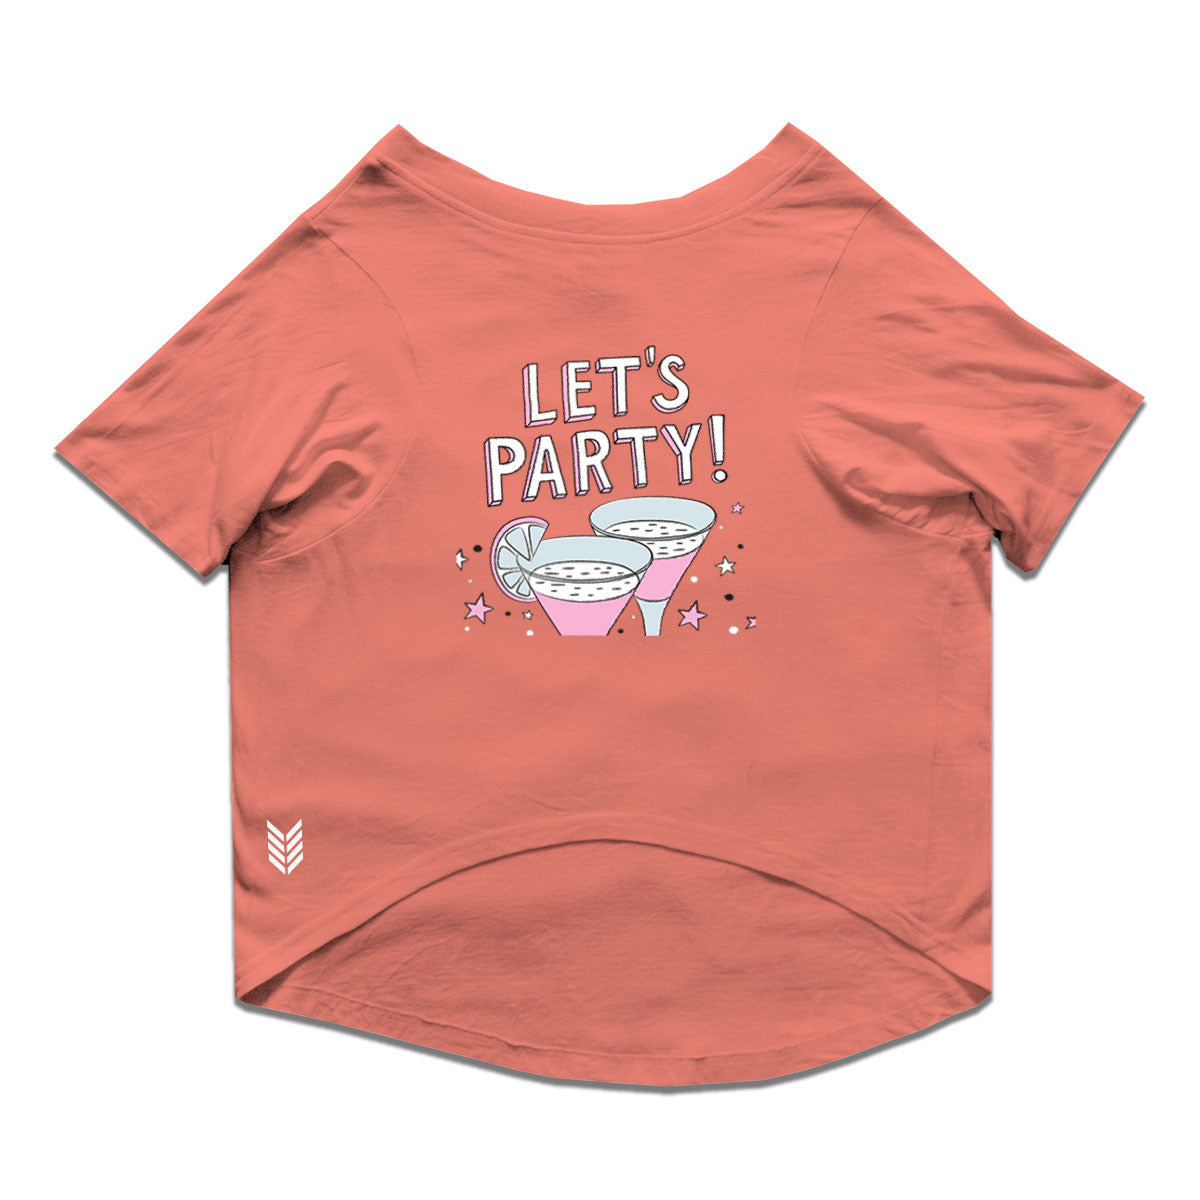 Ruse / Salmon Ruse Basic Crew Neck "Let's Party" Printed Half Sleeves Dog Tee15